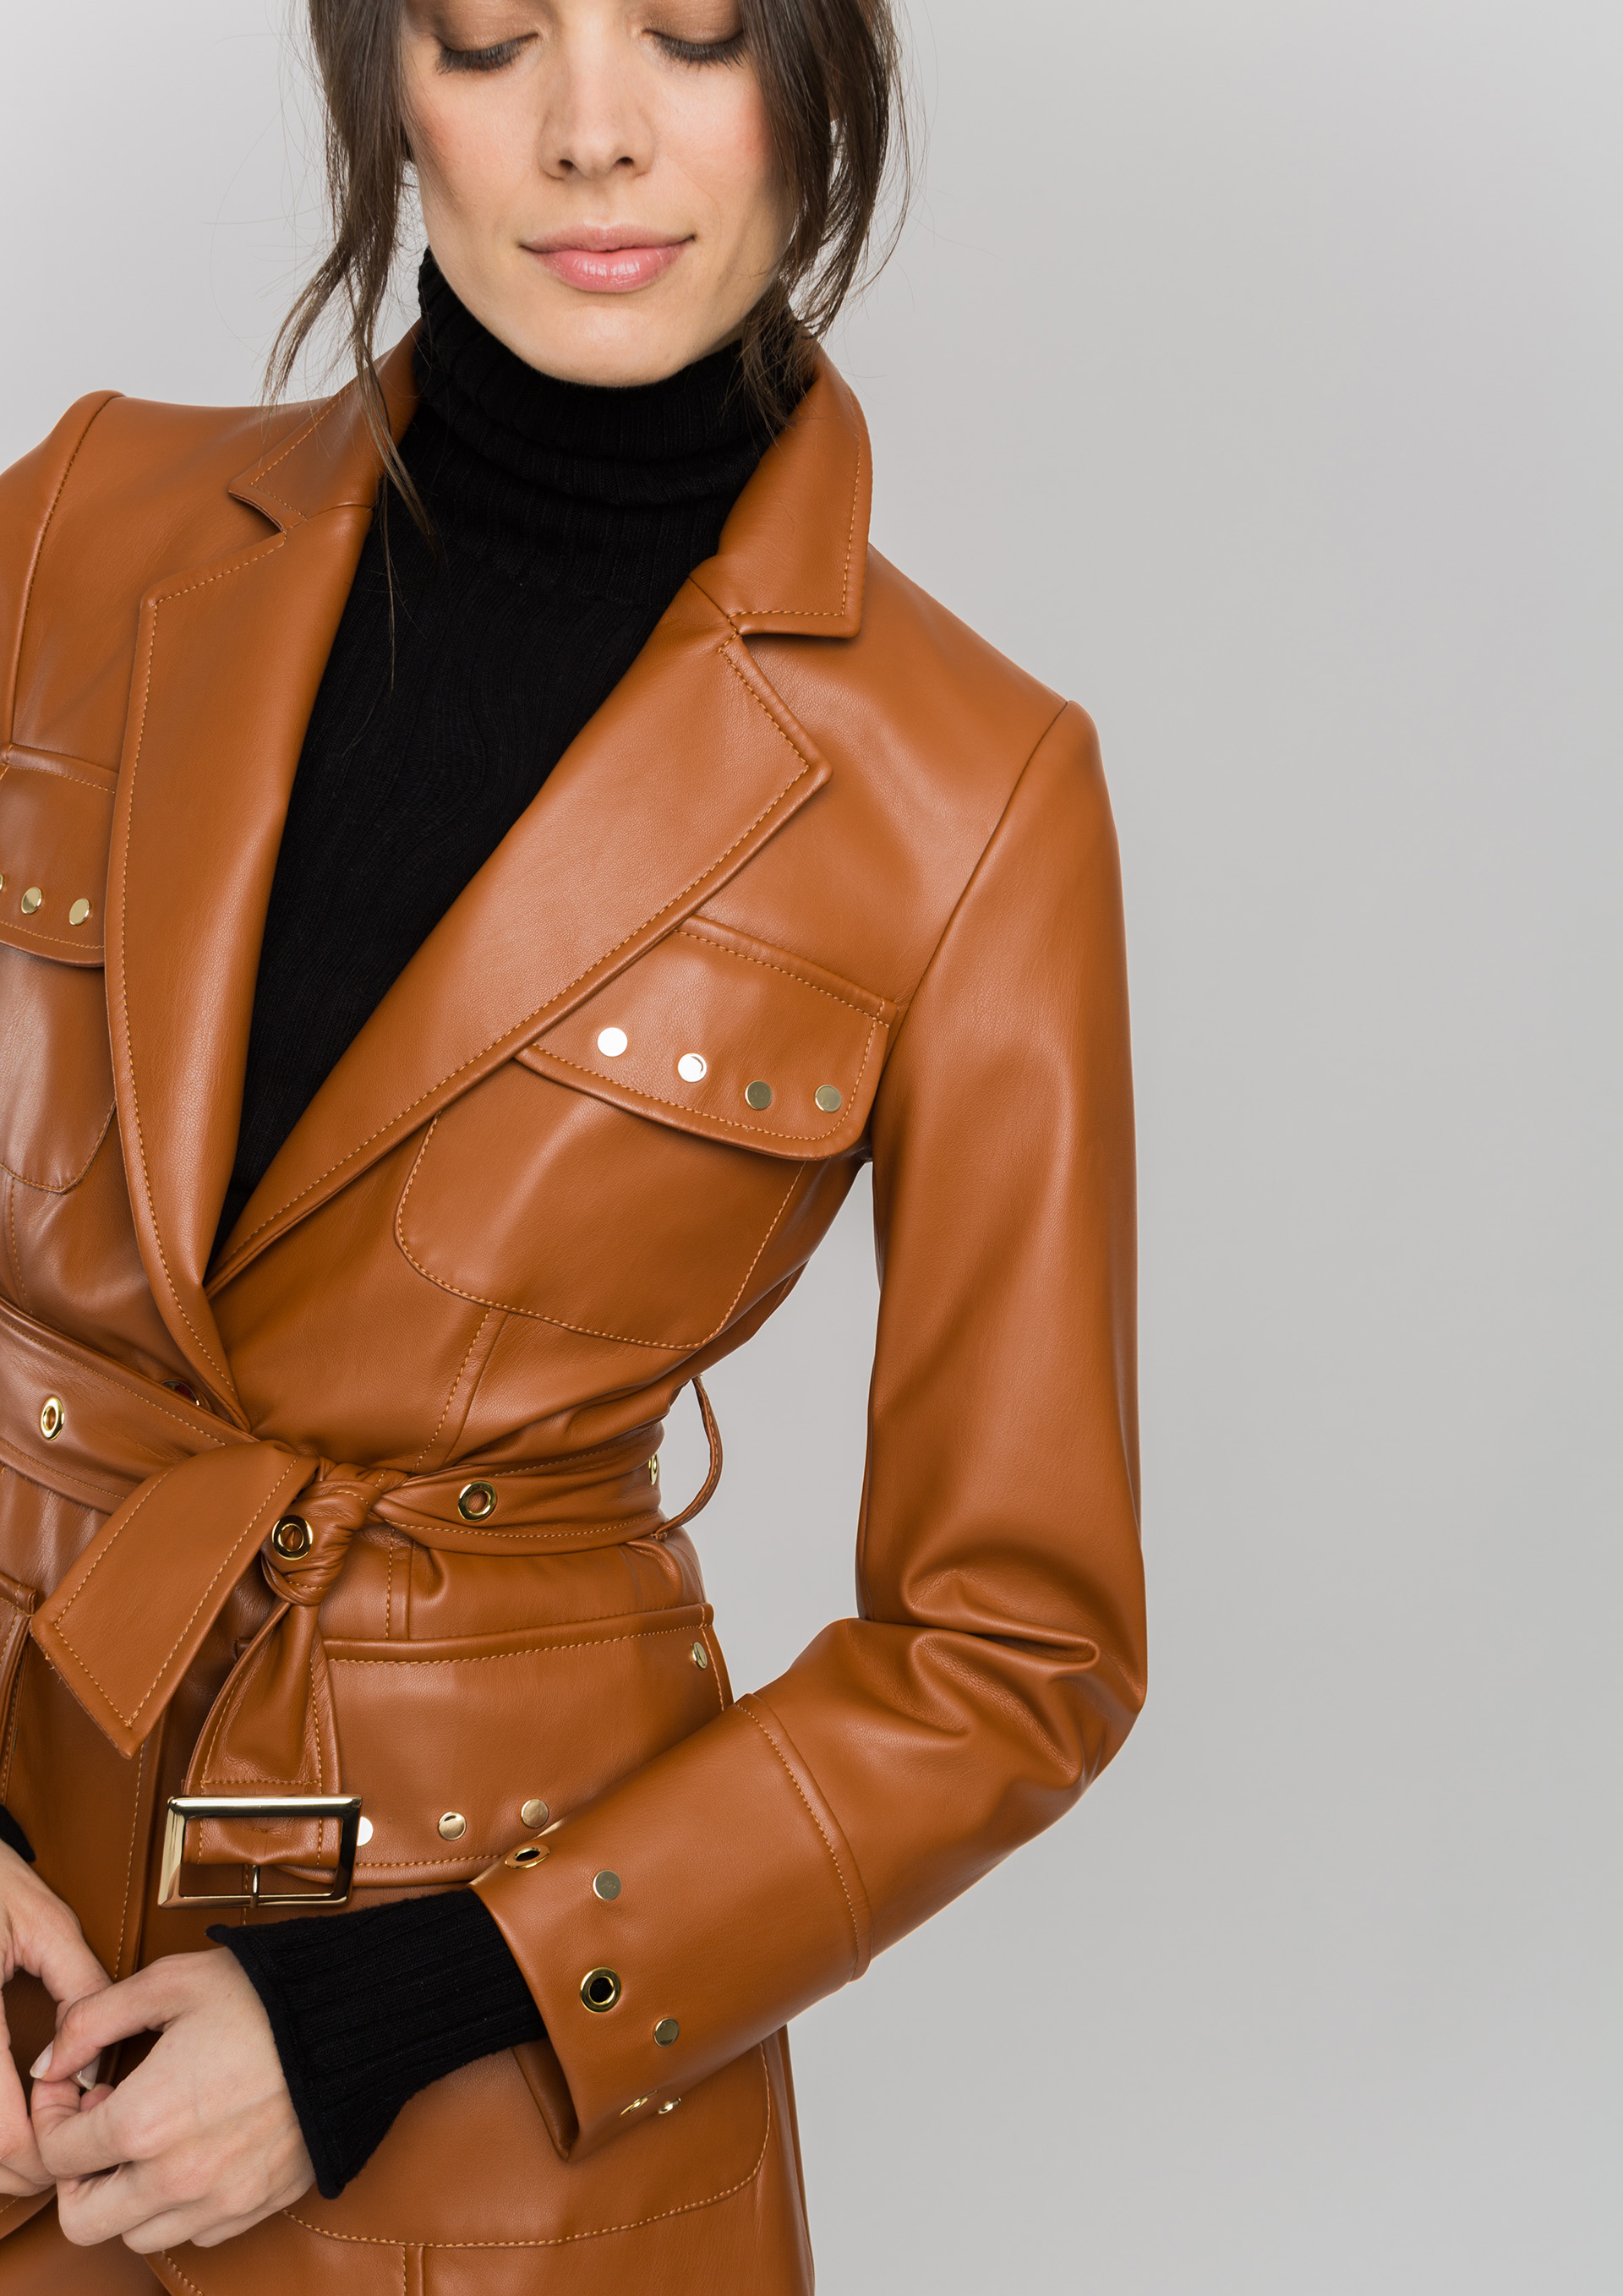 Leather effect jacket in camel.